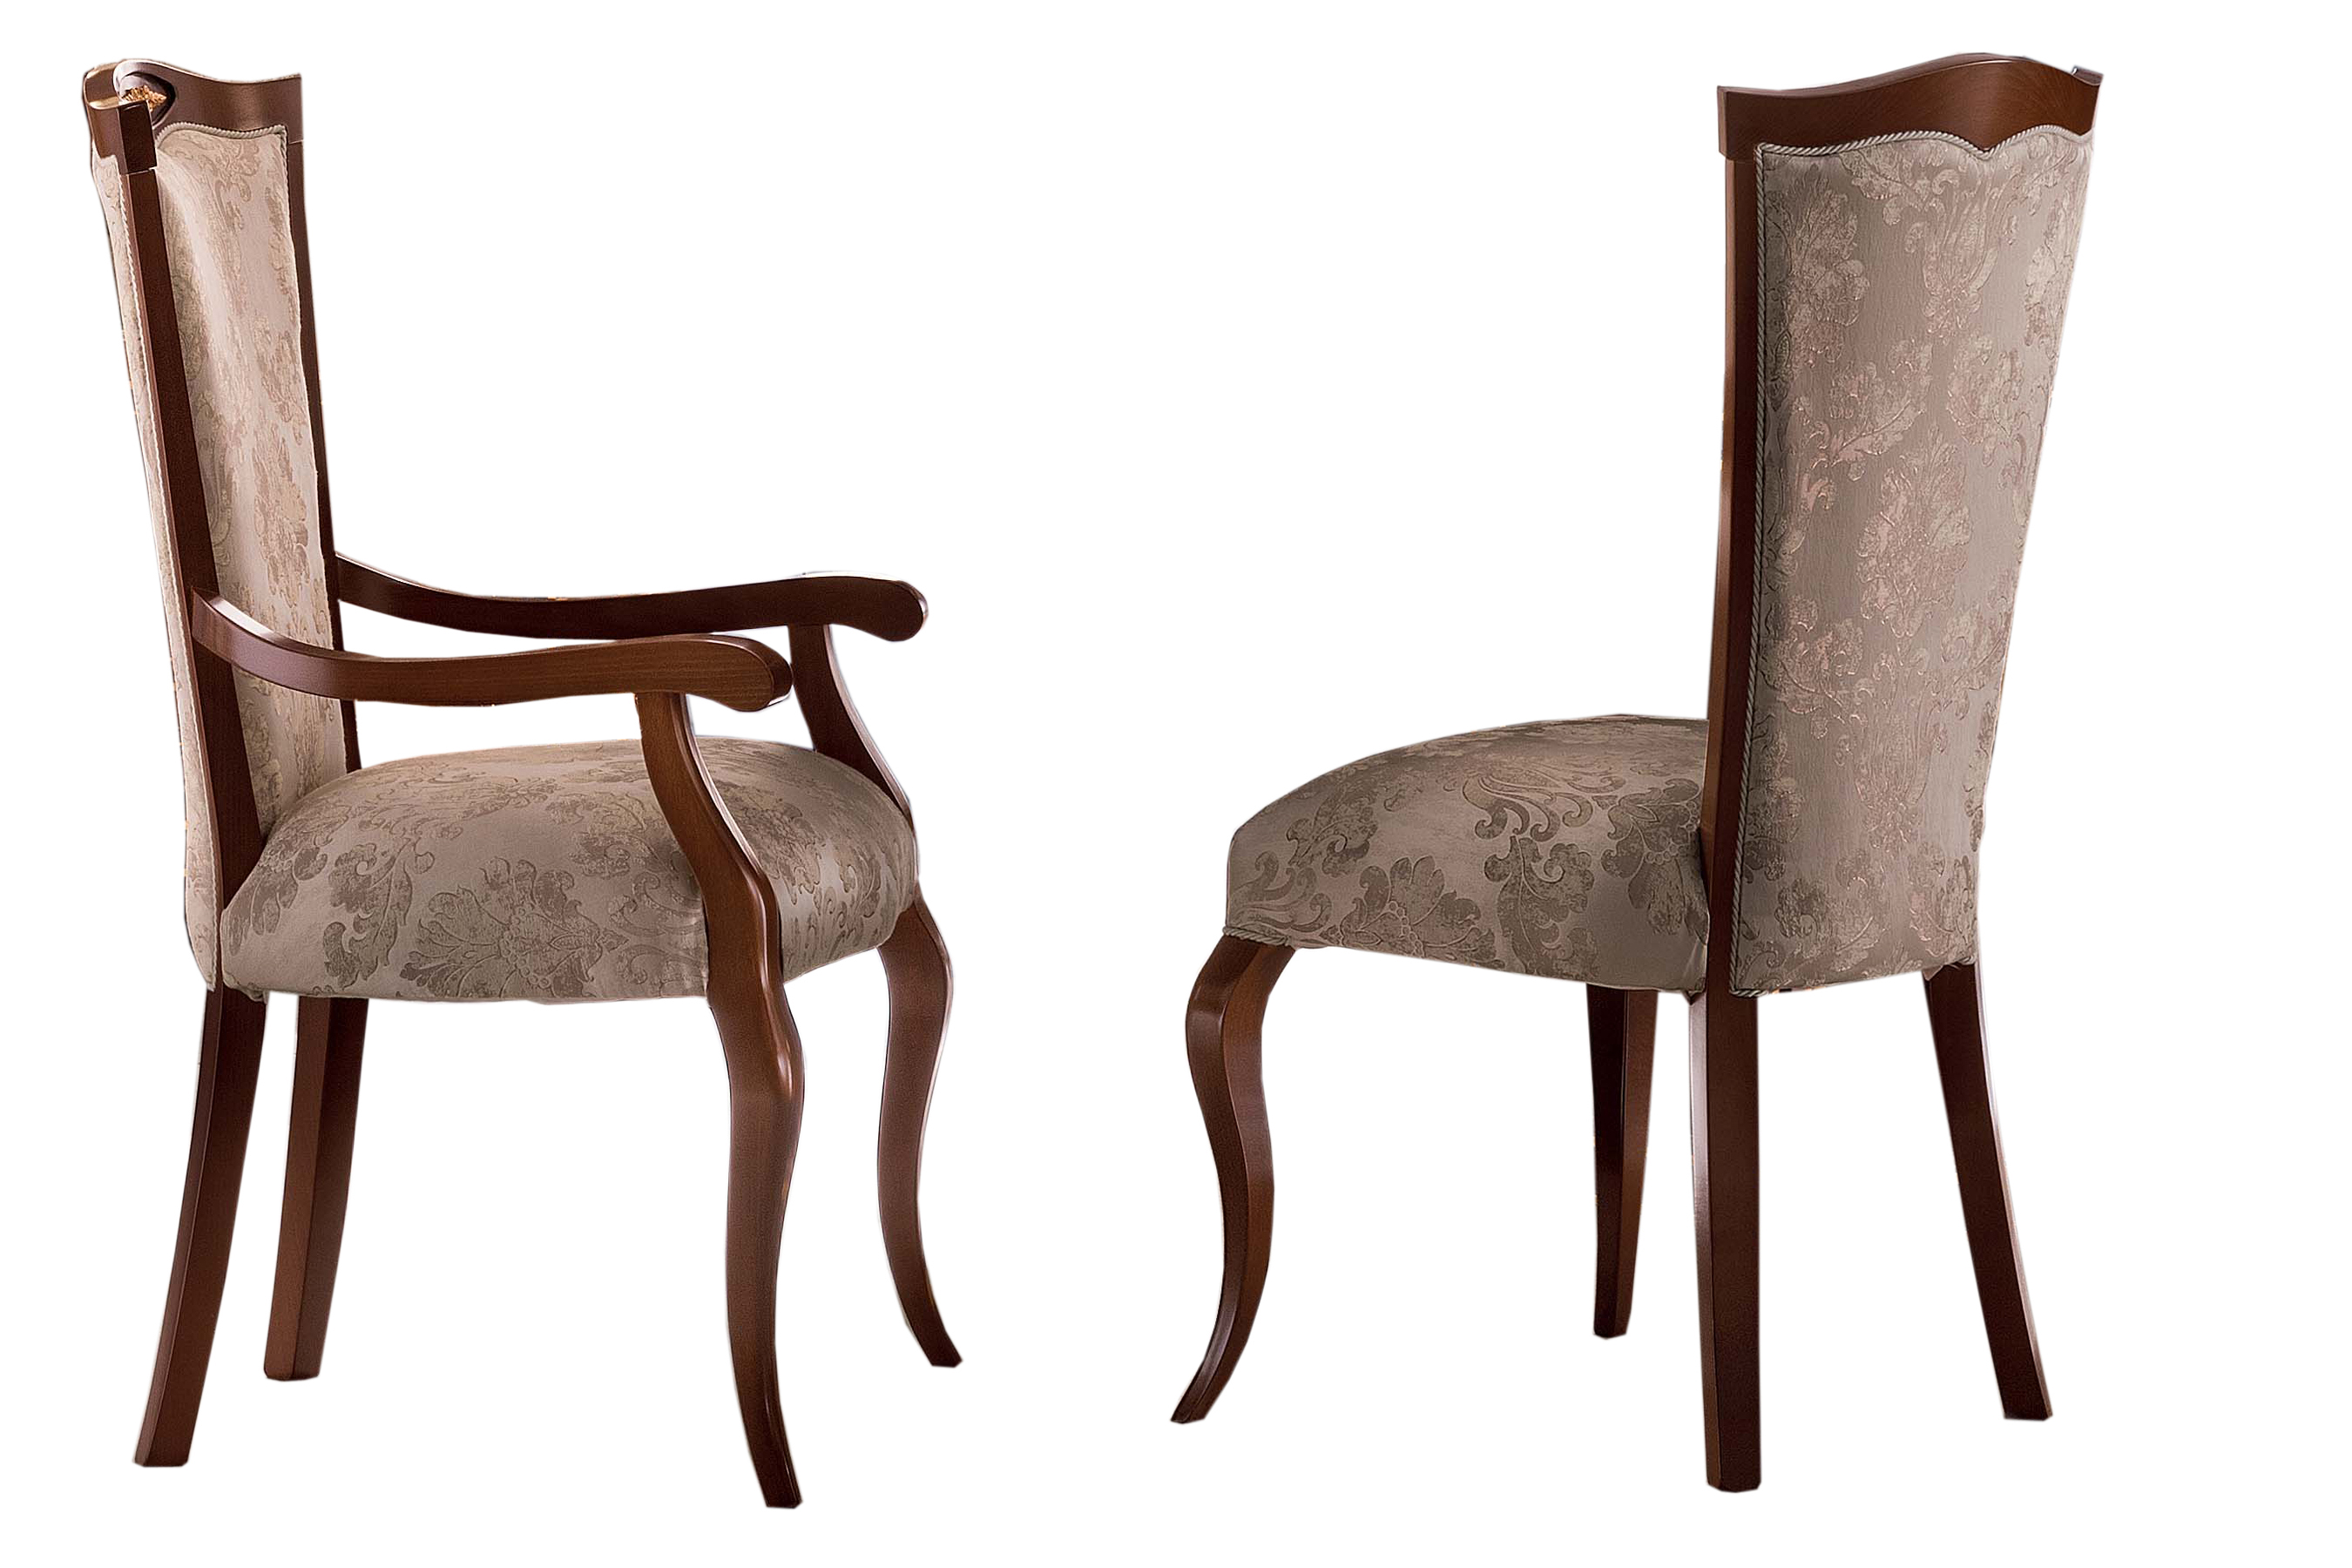 Brands Status orders Modigliani Chair by Arredoclassic